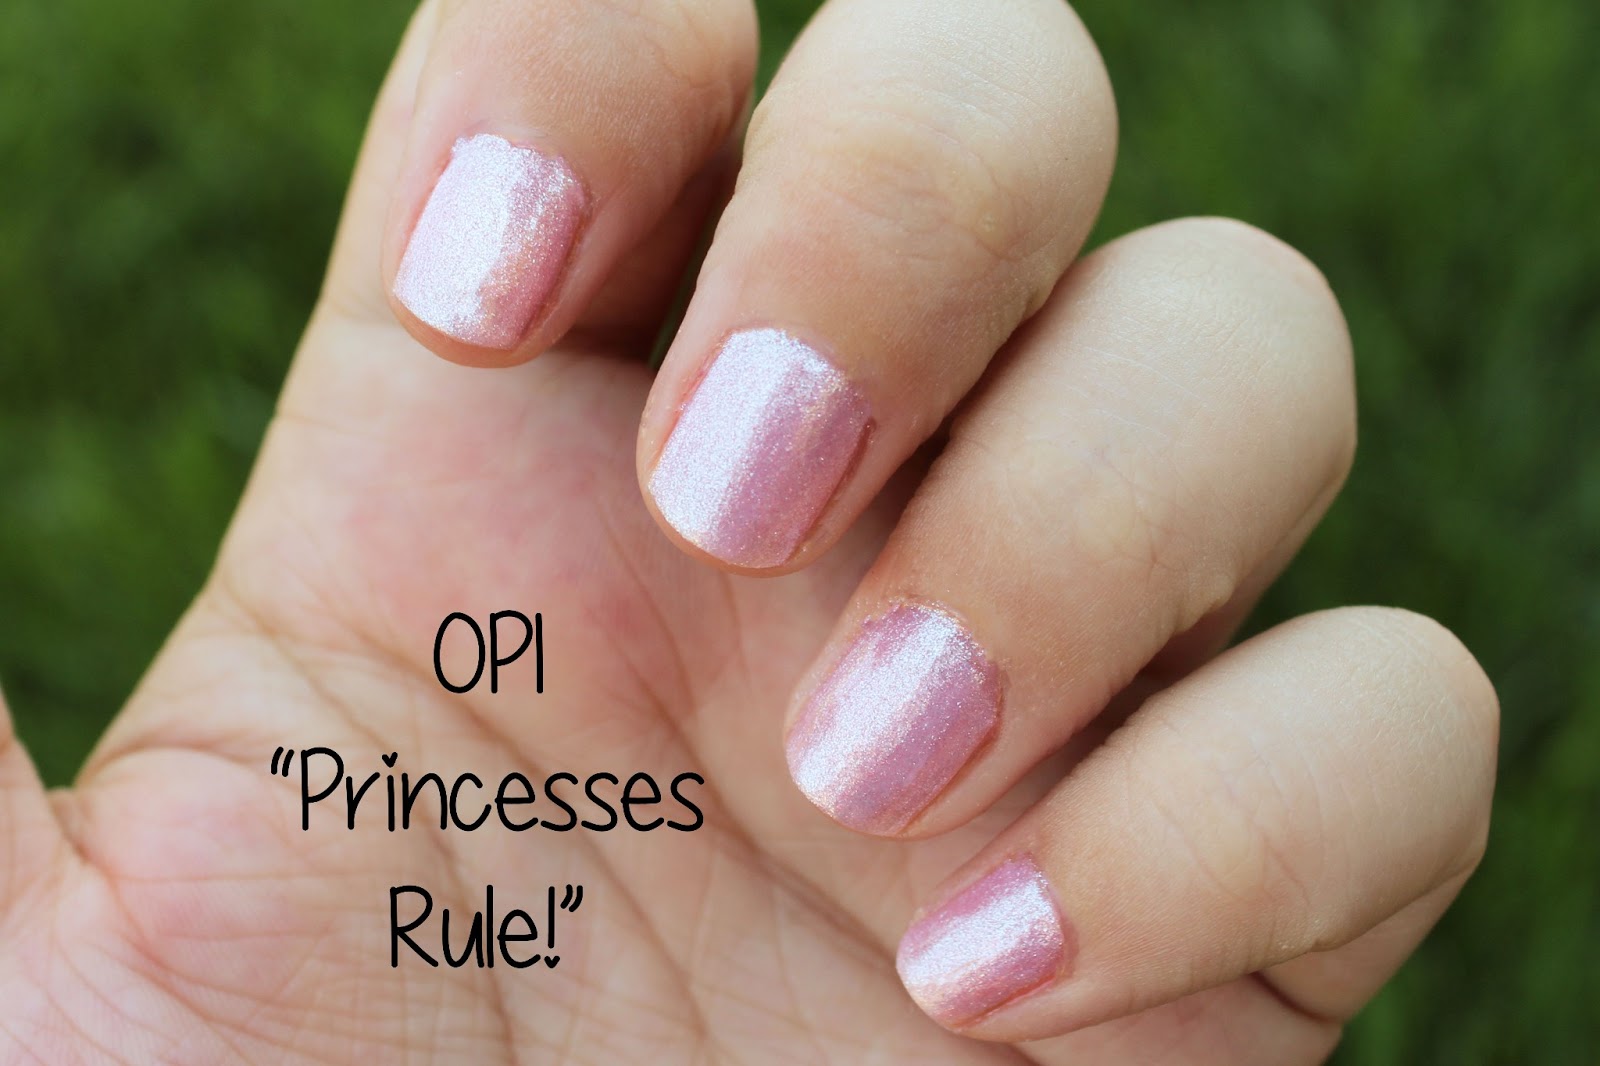 OPI Nail Lacquer, Princesses Rule! - wide 5